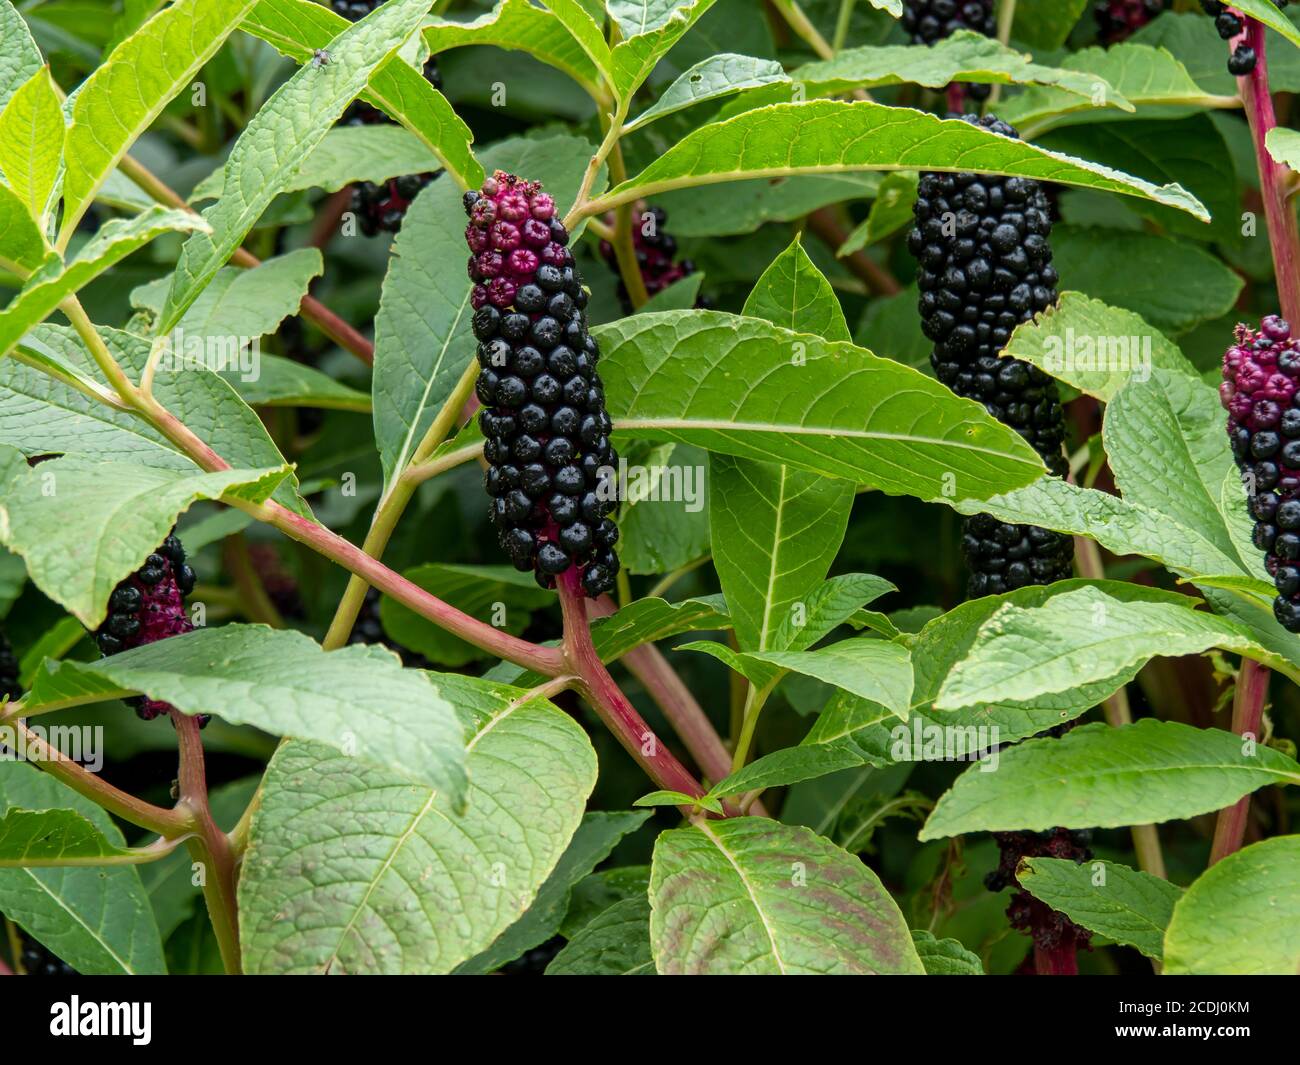 Black and red berries and green leaves of Indian pokeweed, Phytolacca acinosa Stock Photo